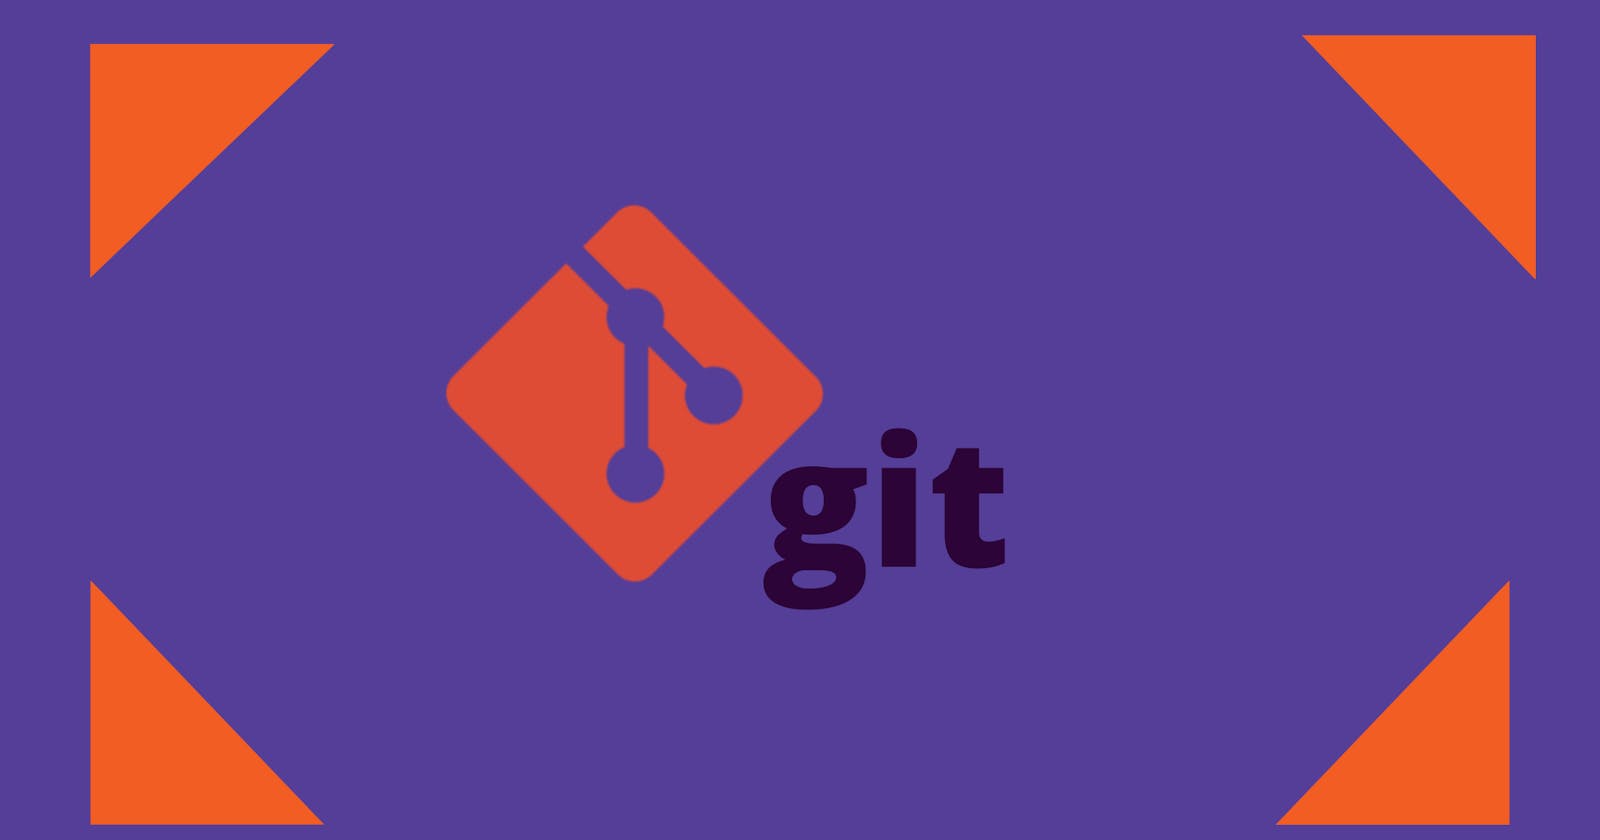 Frequently used Git commands while contributing to Open Source